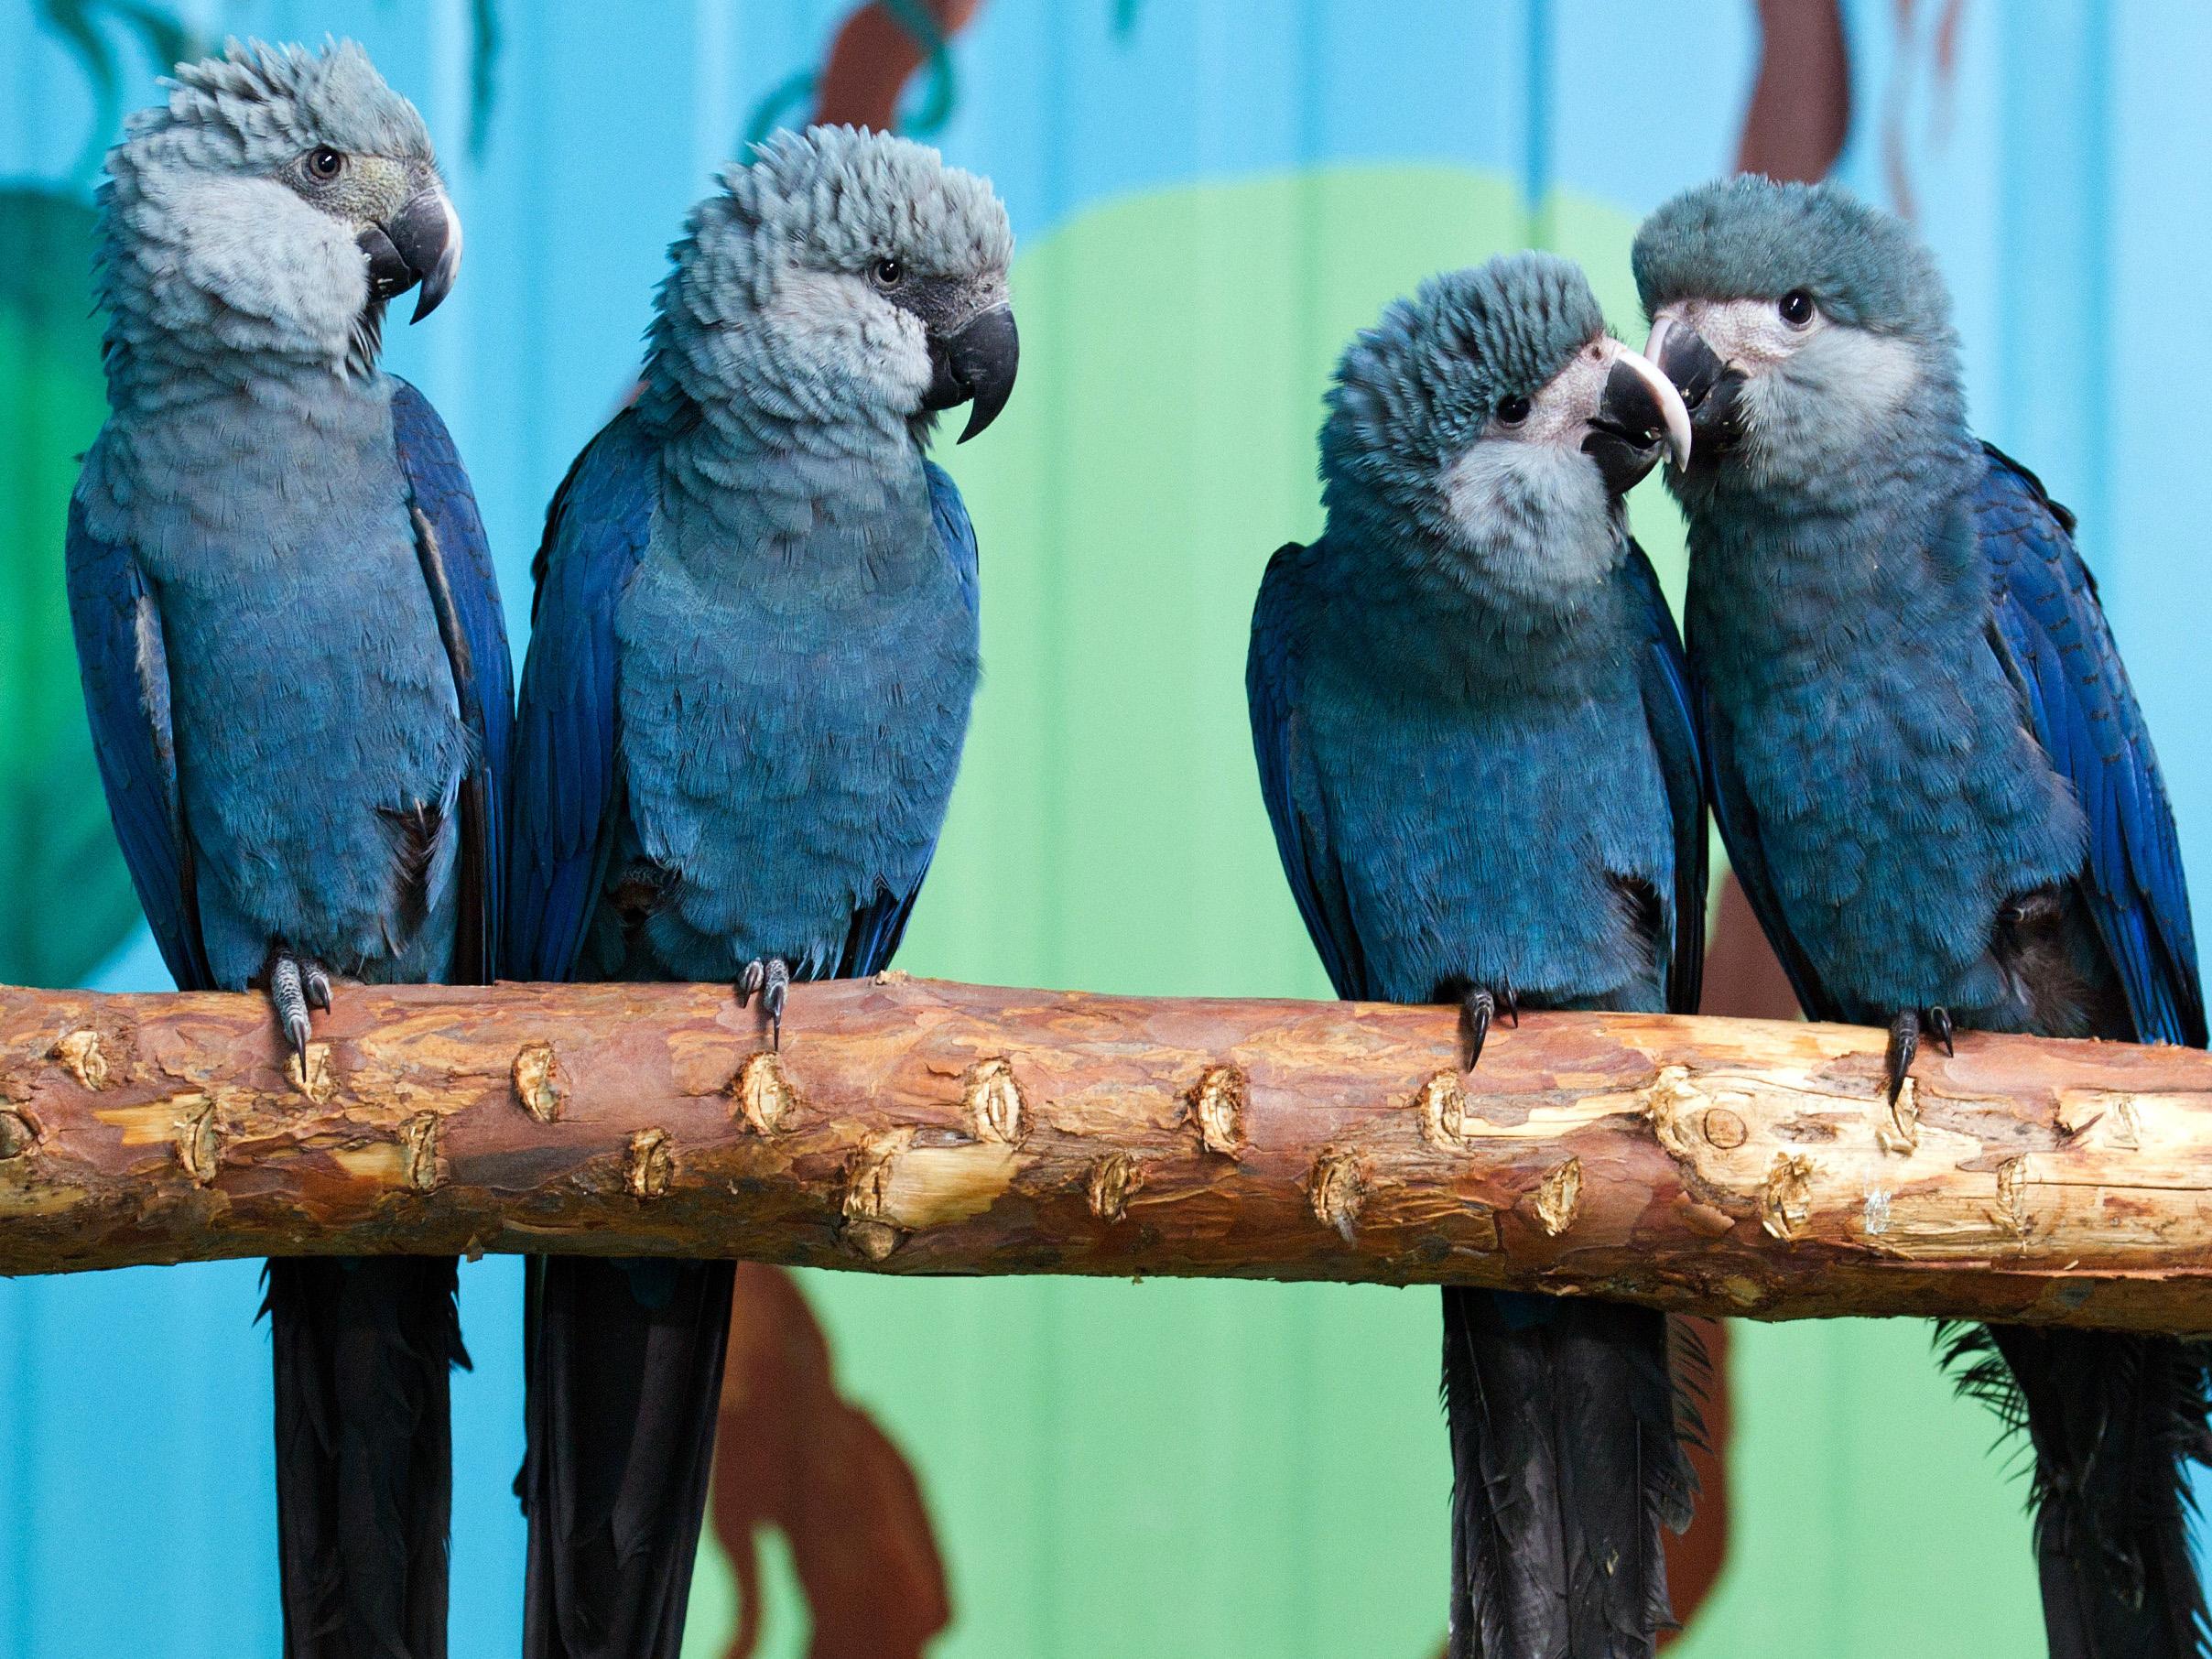 Spix's macaw has been officially declared extinct in the wild